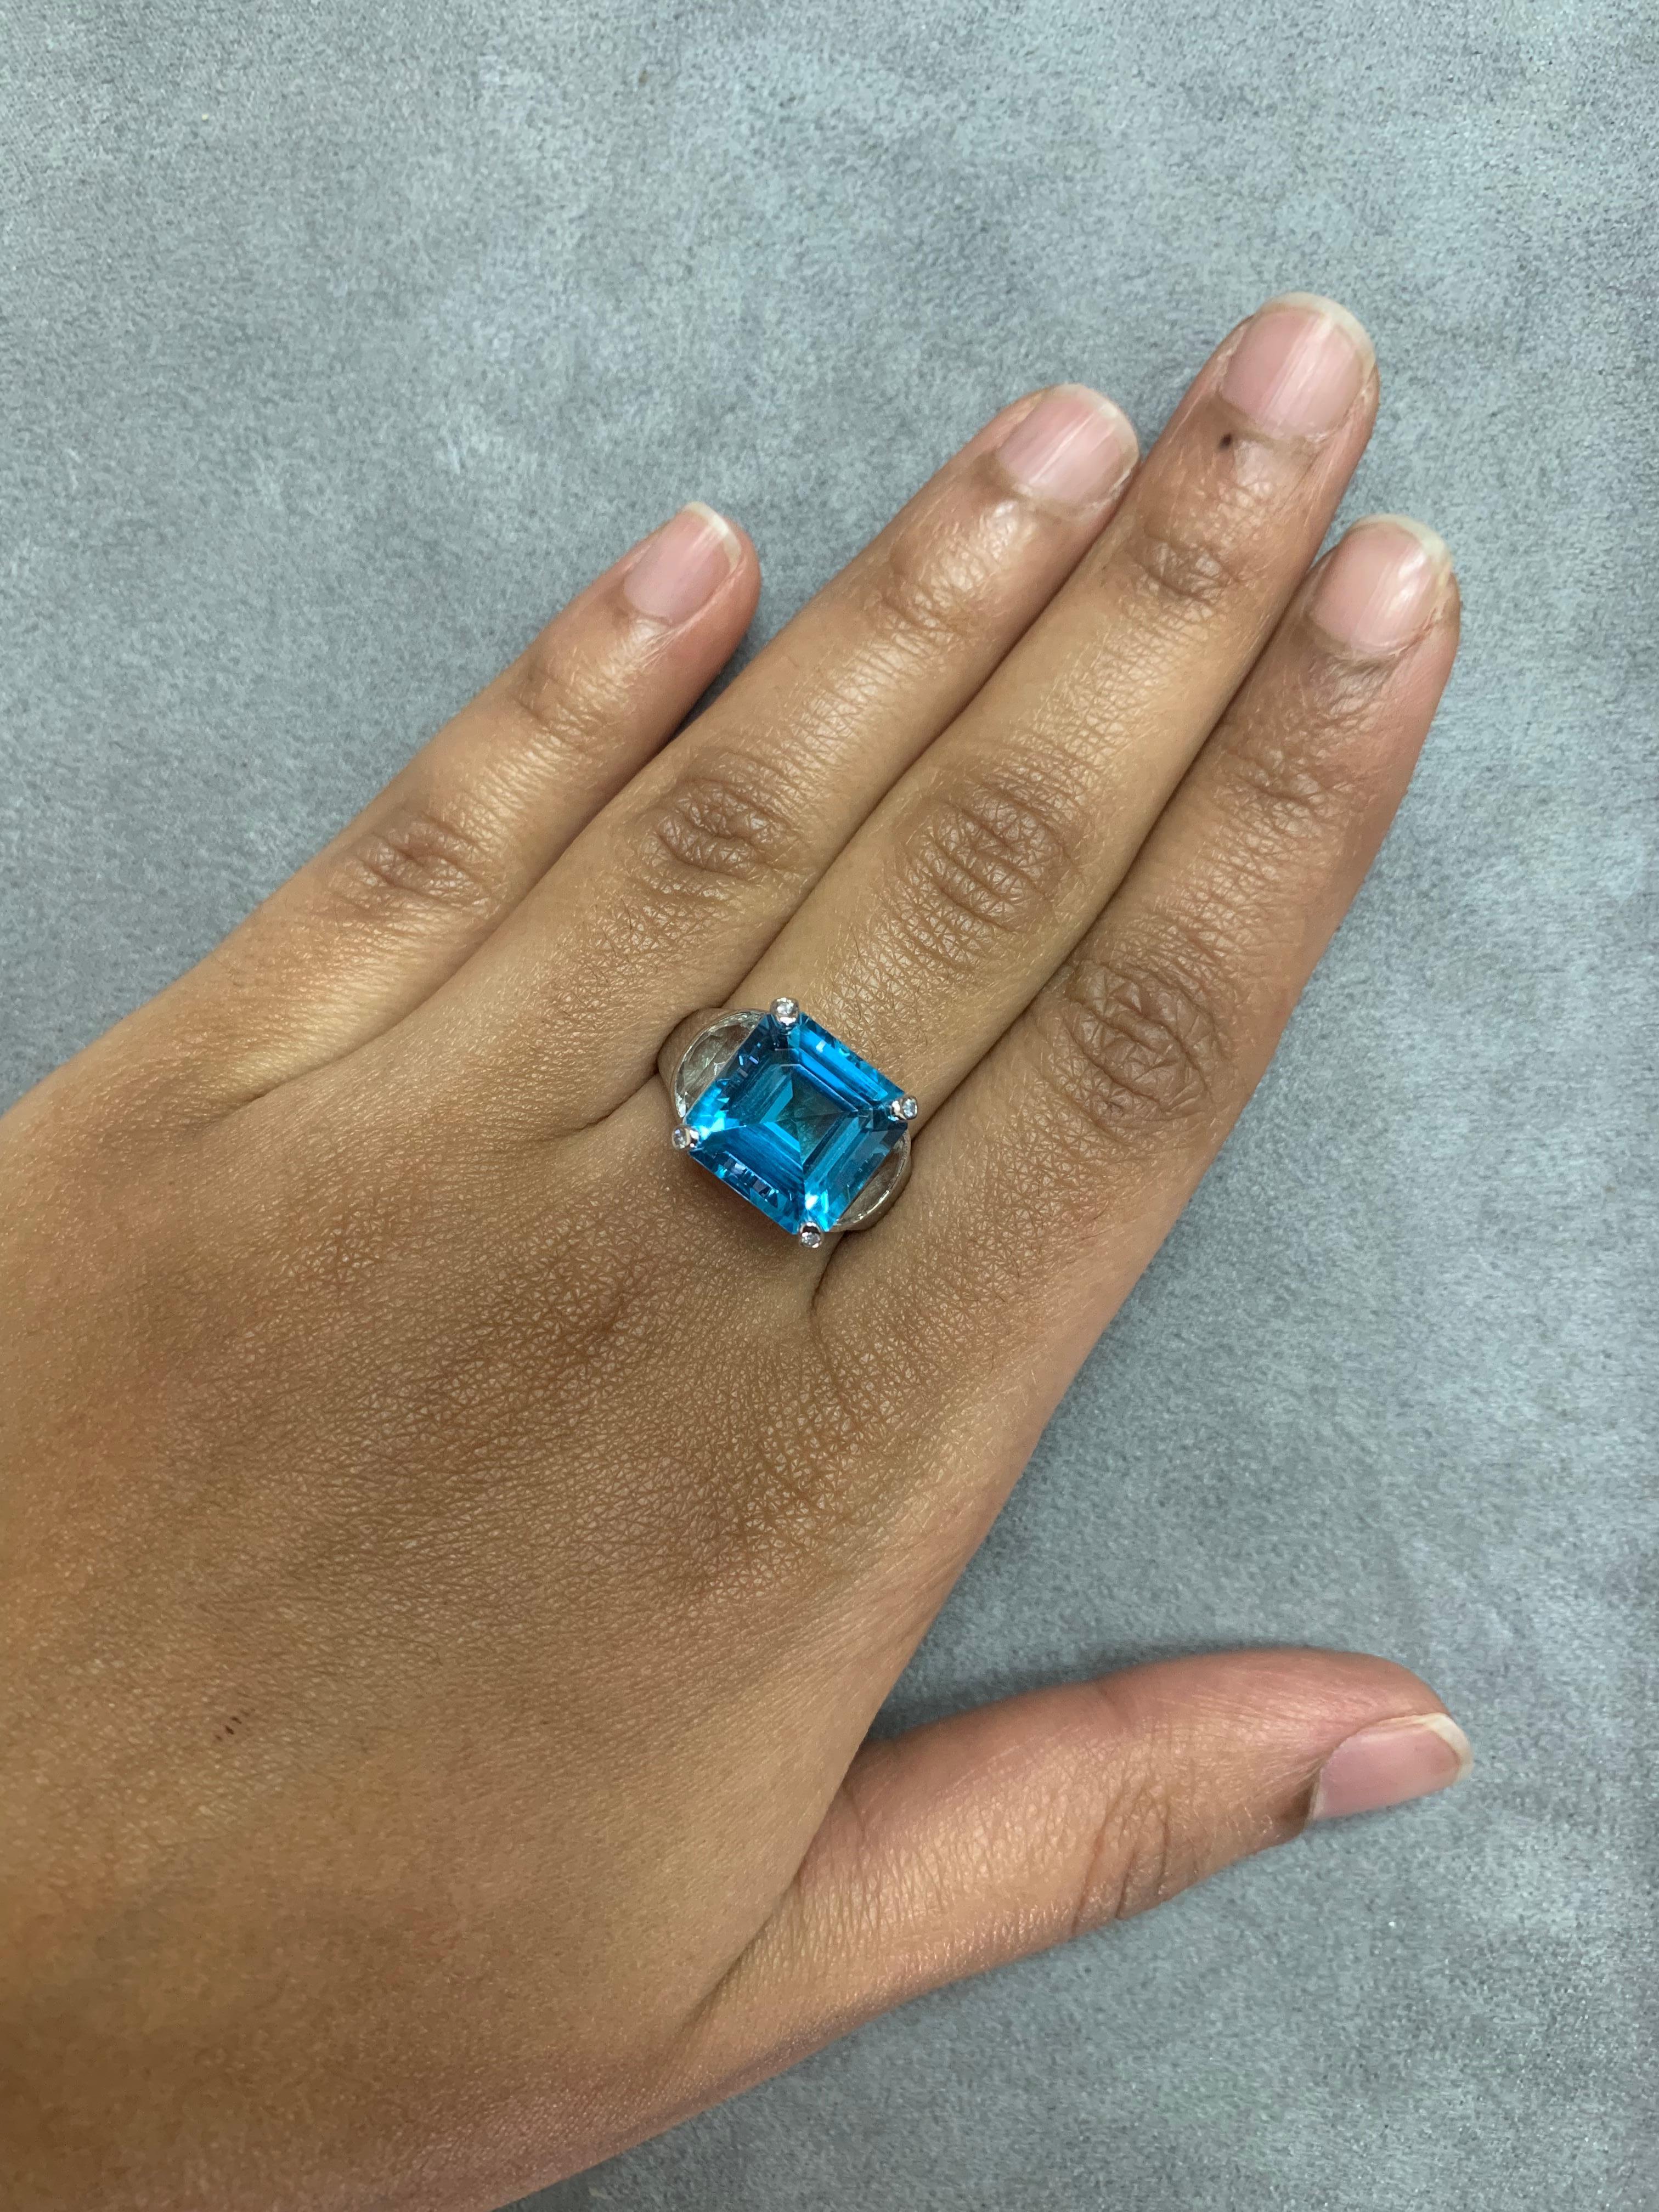 Sunita Nahata presents a collection of bold yet dainty cocktail rings. Each ring features a gorgeous octagon shaped gem set on a layer of channel set pink tourmalines and flanked with topaz and diamonds. This particular ring features a bold blue